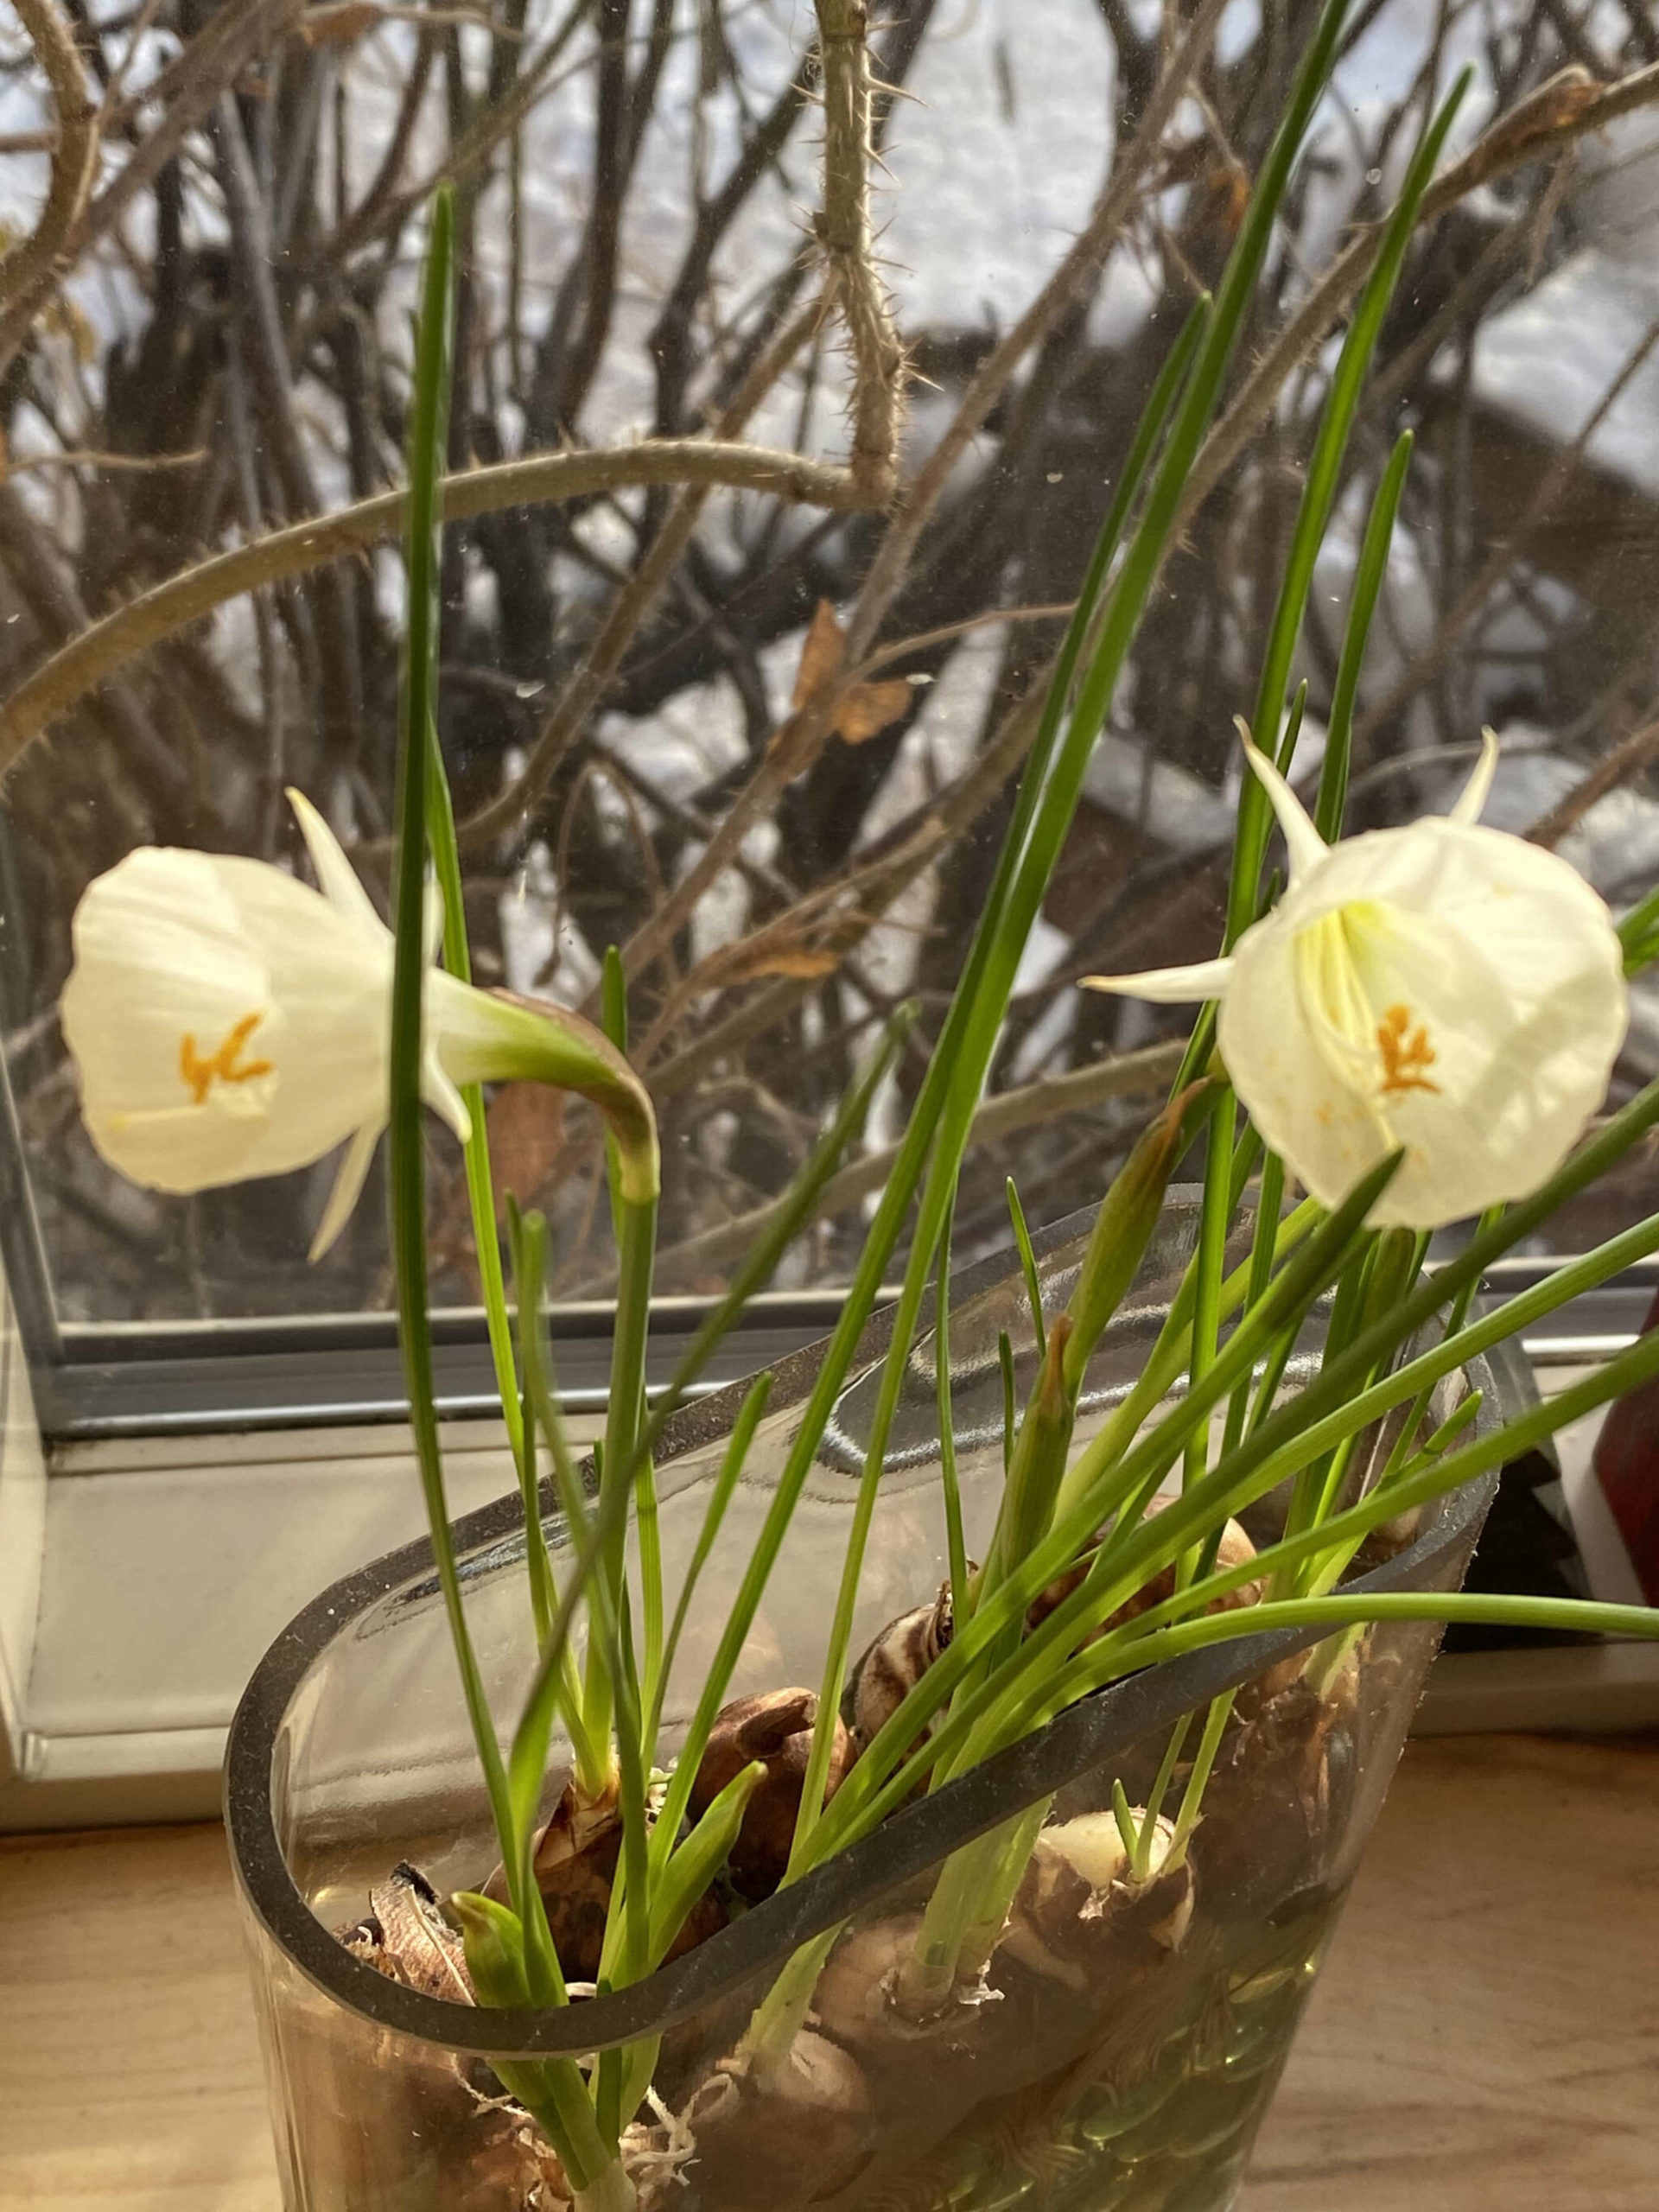 Debi Poore has nurtured these petticoat daffodils (bublocodium narcissus) on her window sill this winter, bringing a bright spot to her domestic hubbub. (Photo by Debi Poore)